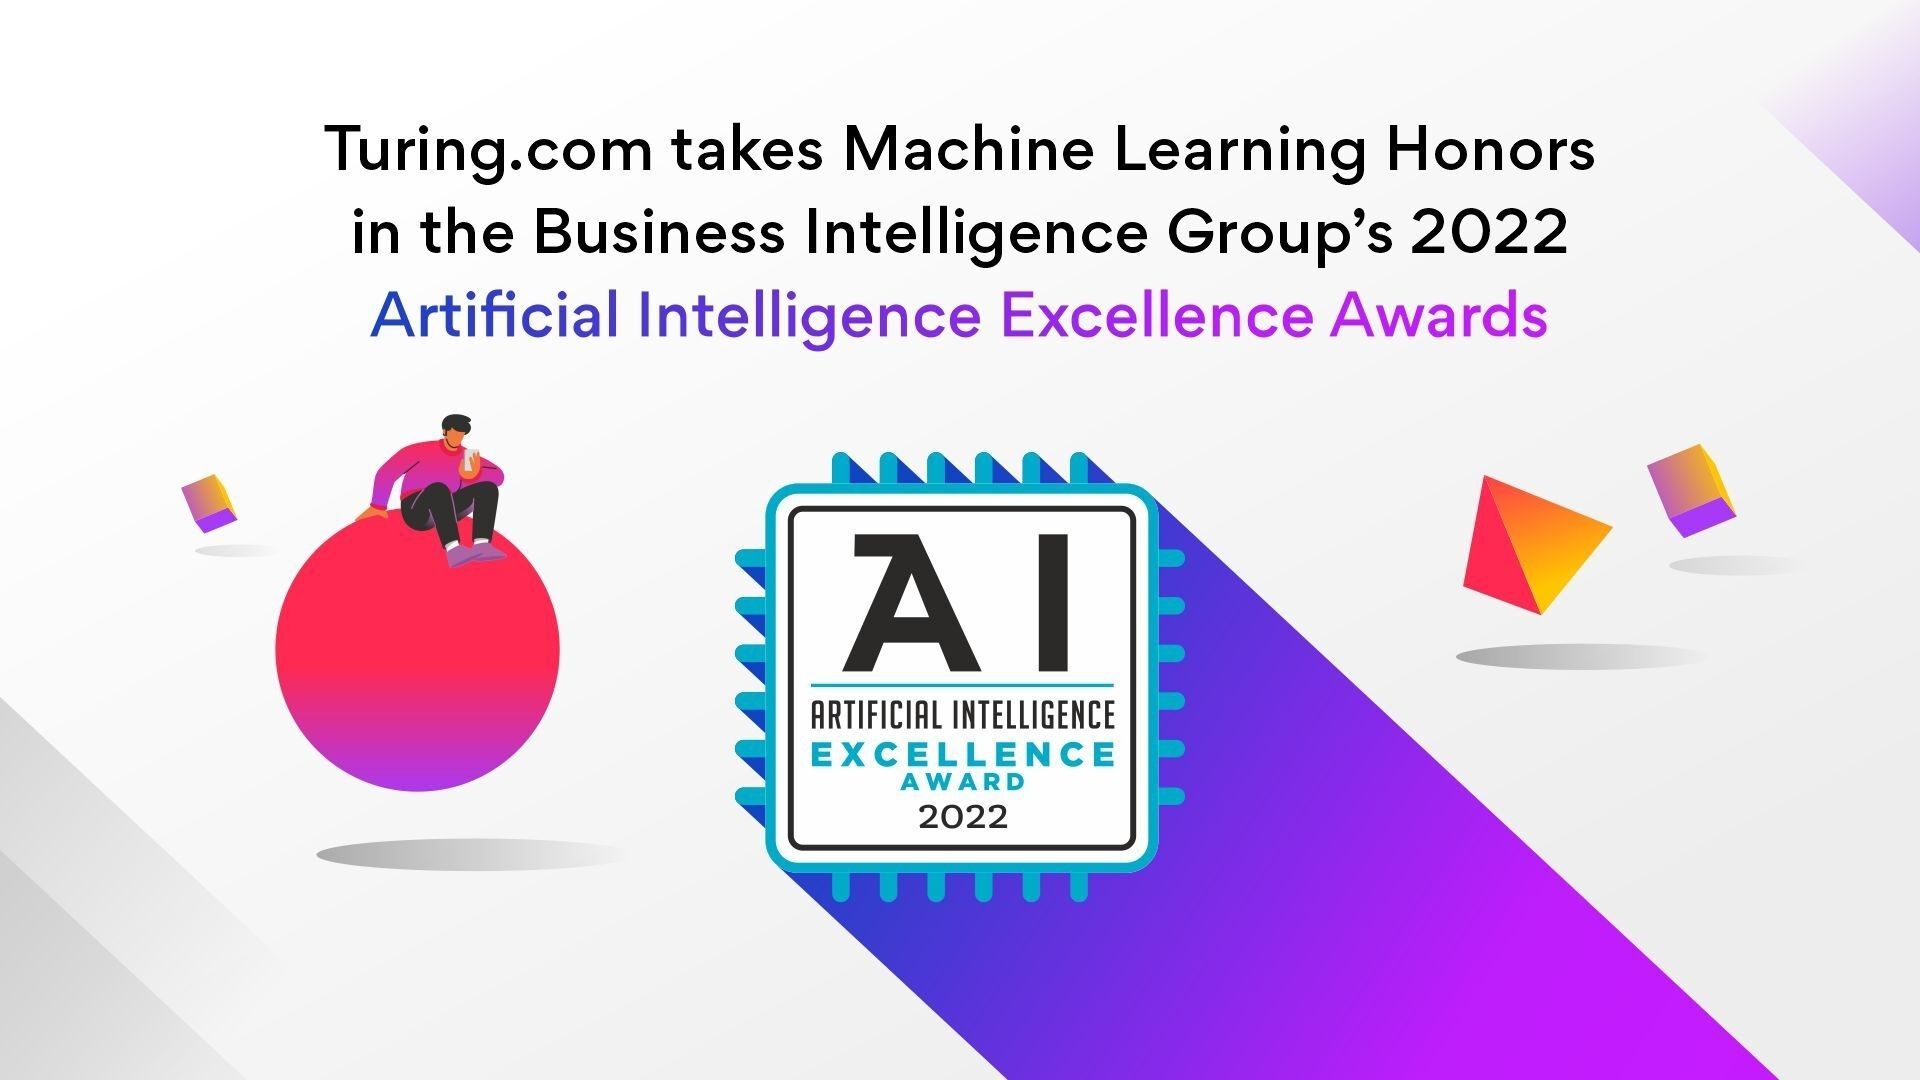 Turing.com at AI excellence award 2022